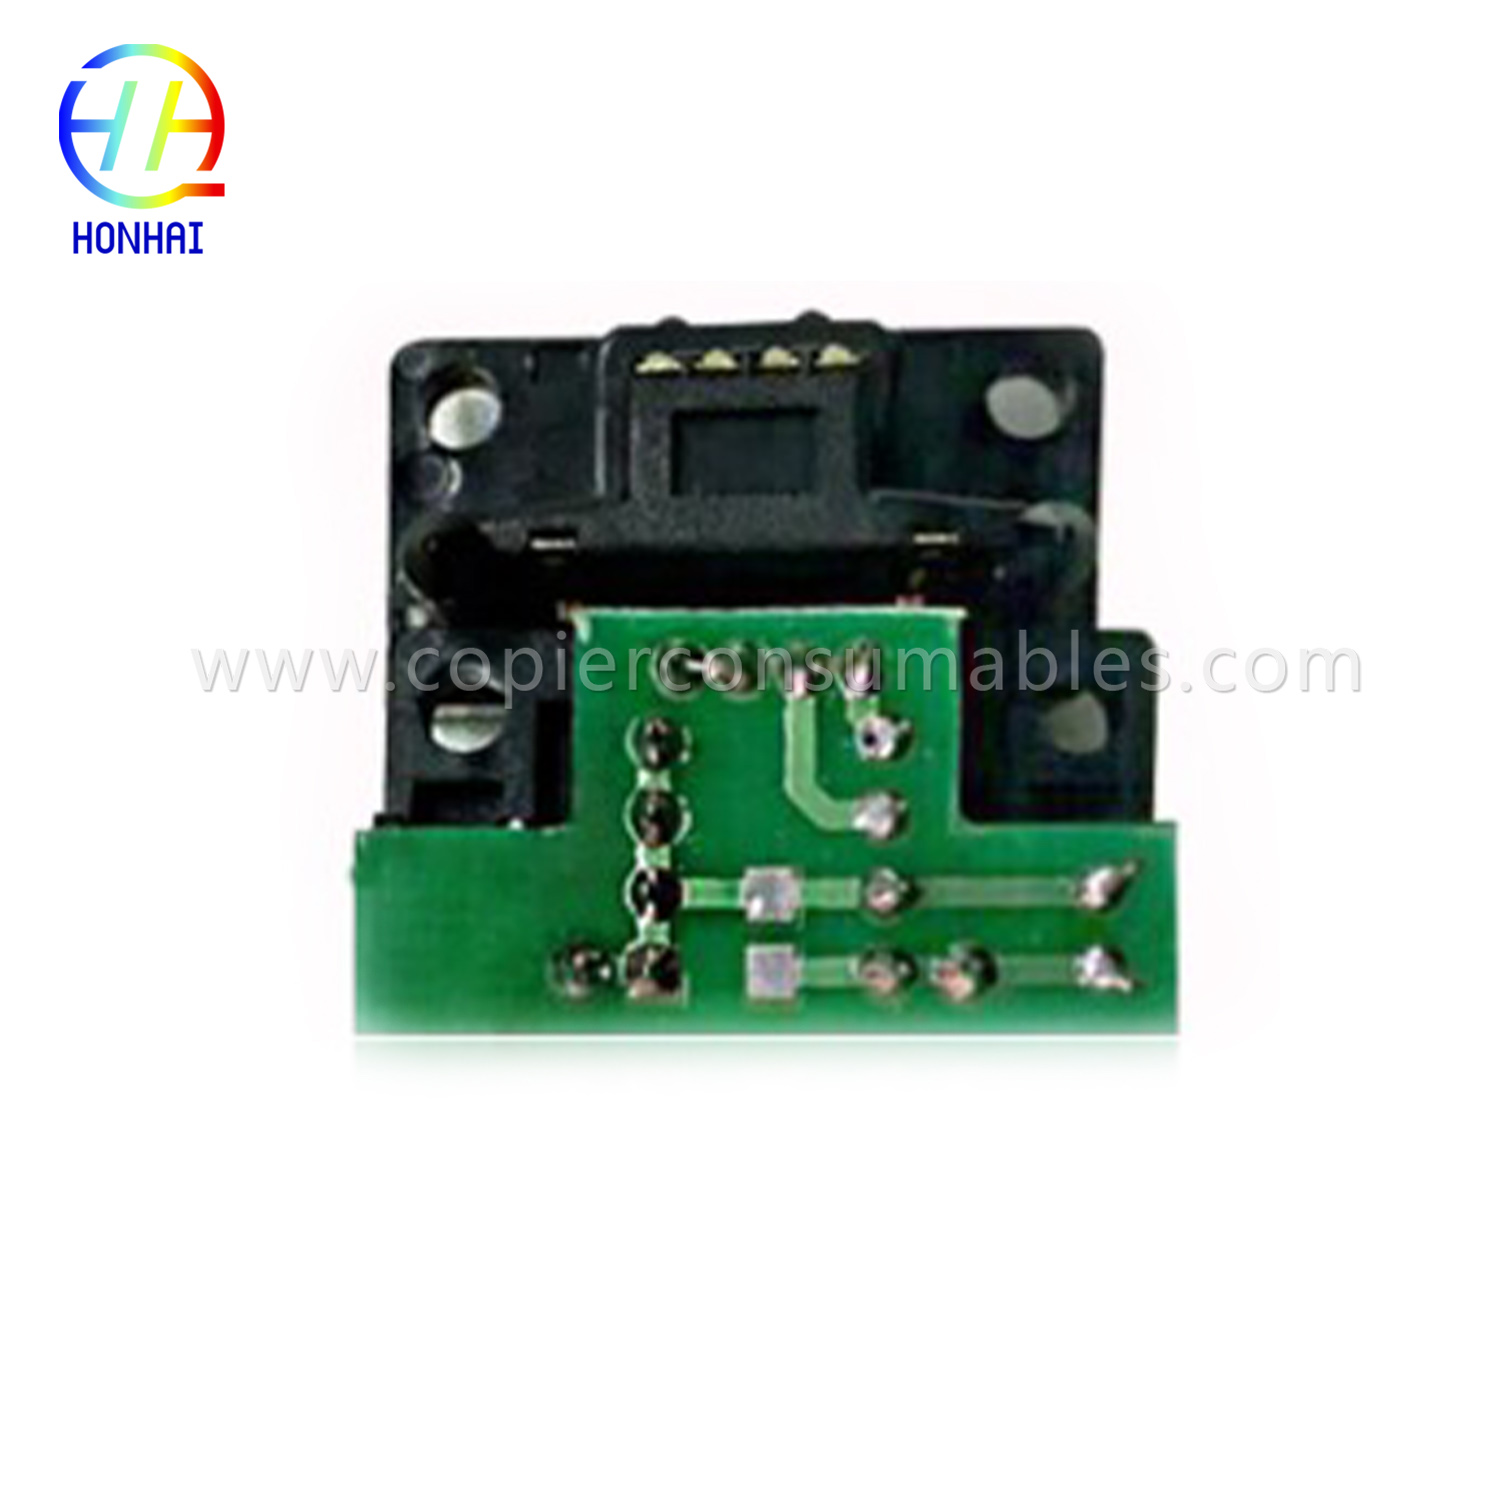 Drum Chip for Xerox Workcenter 5945 5955 5945I 5955I (013R00669 147K) 拷贝